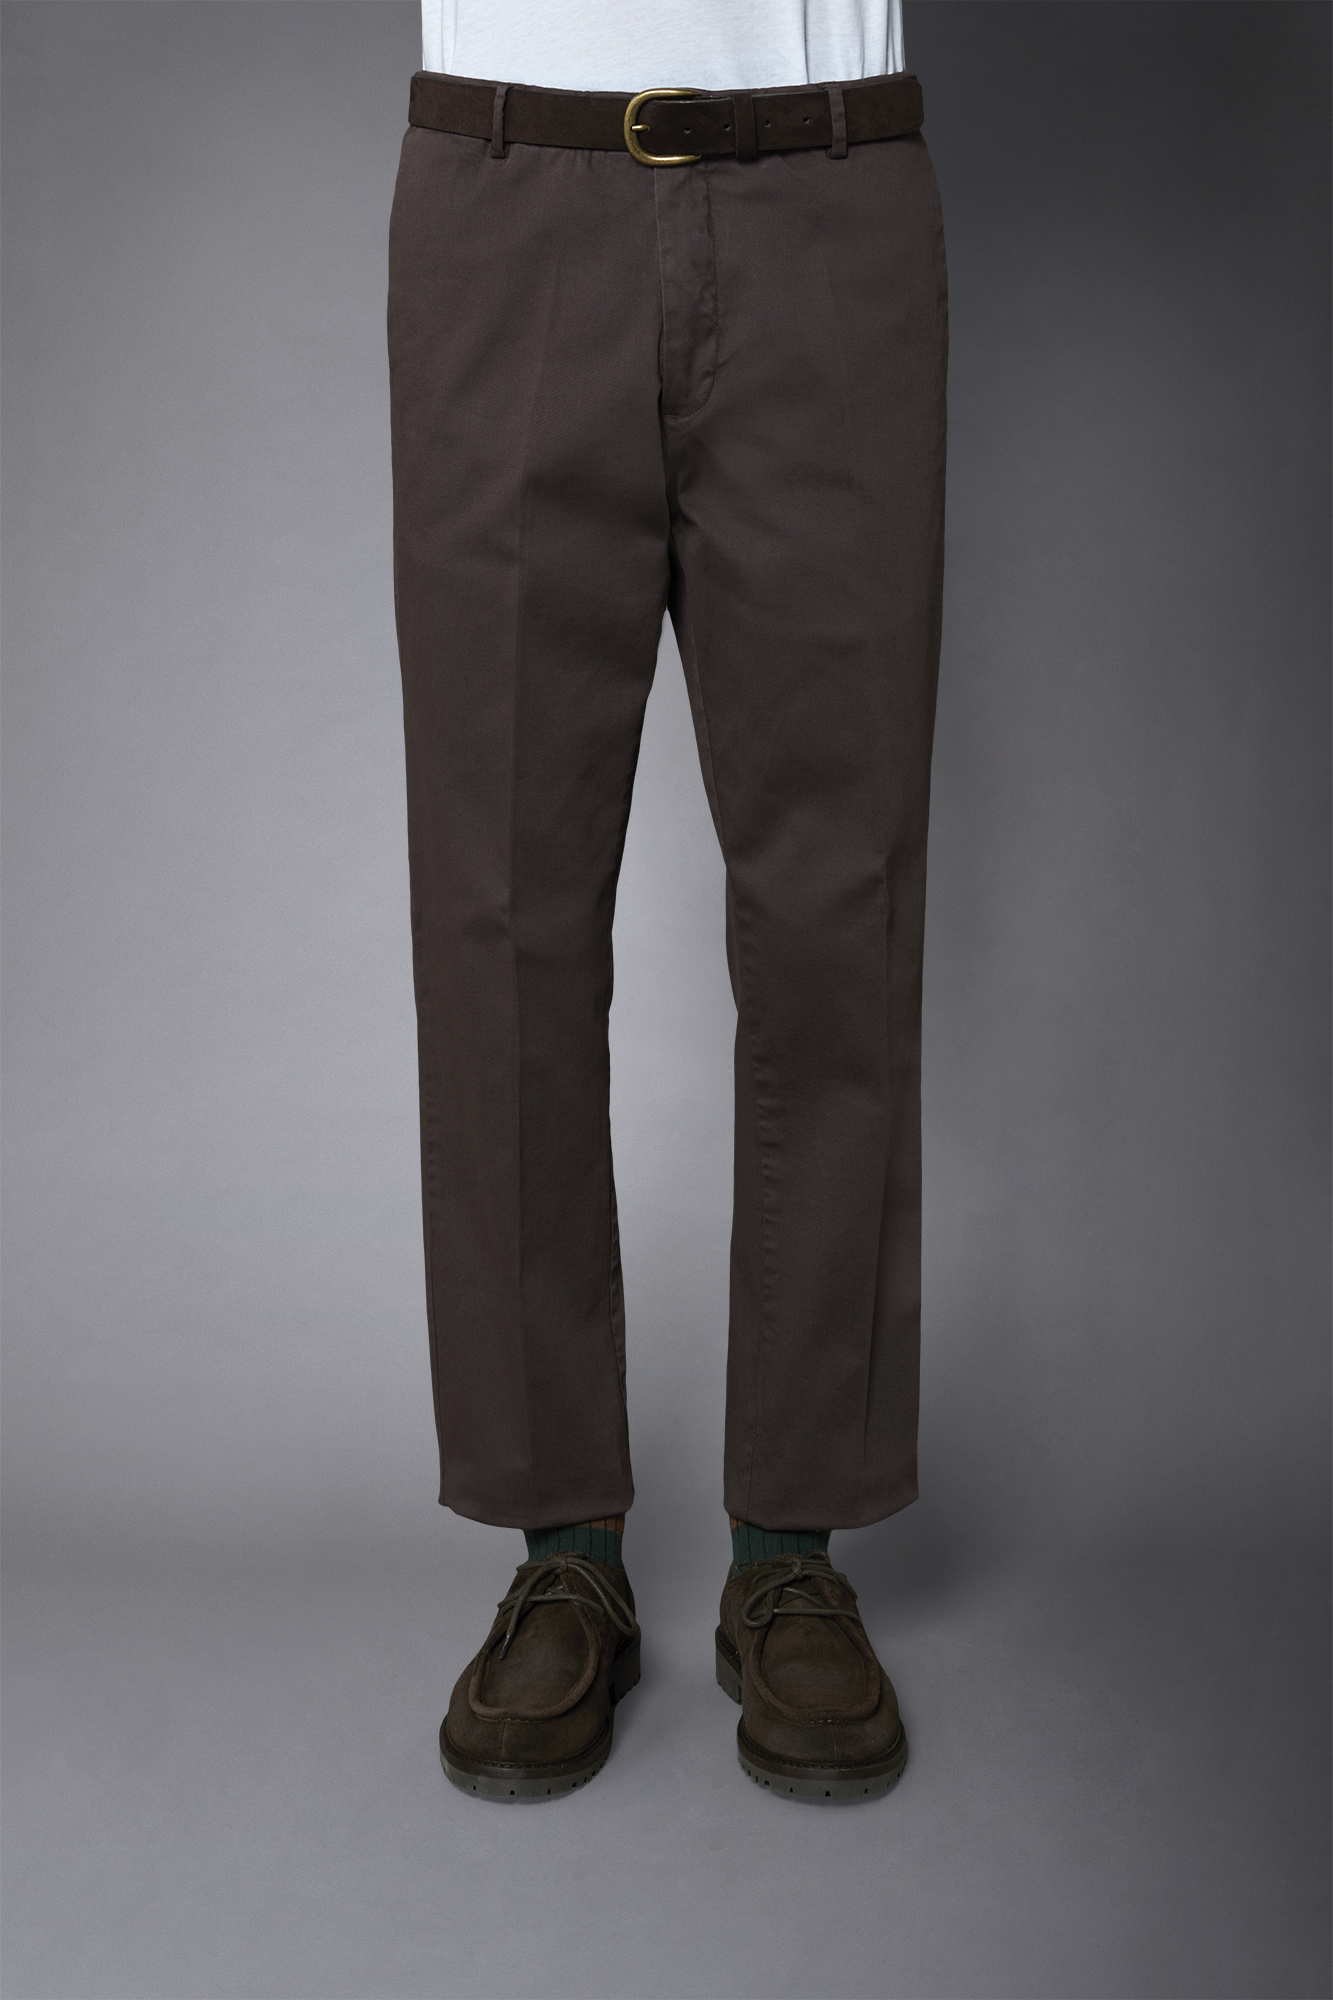 Men's classic chino pants regular fit twill construction image number null